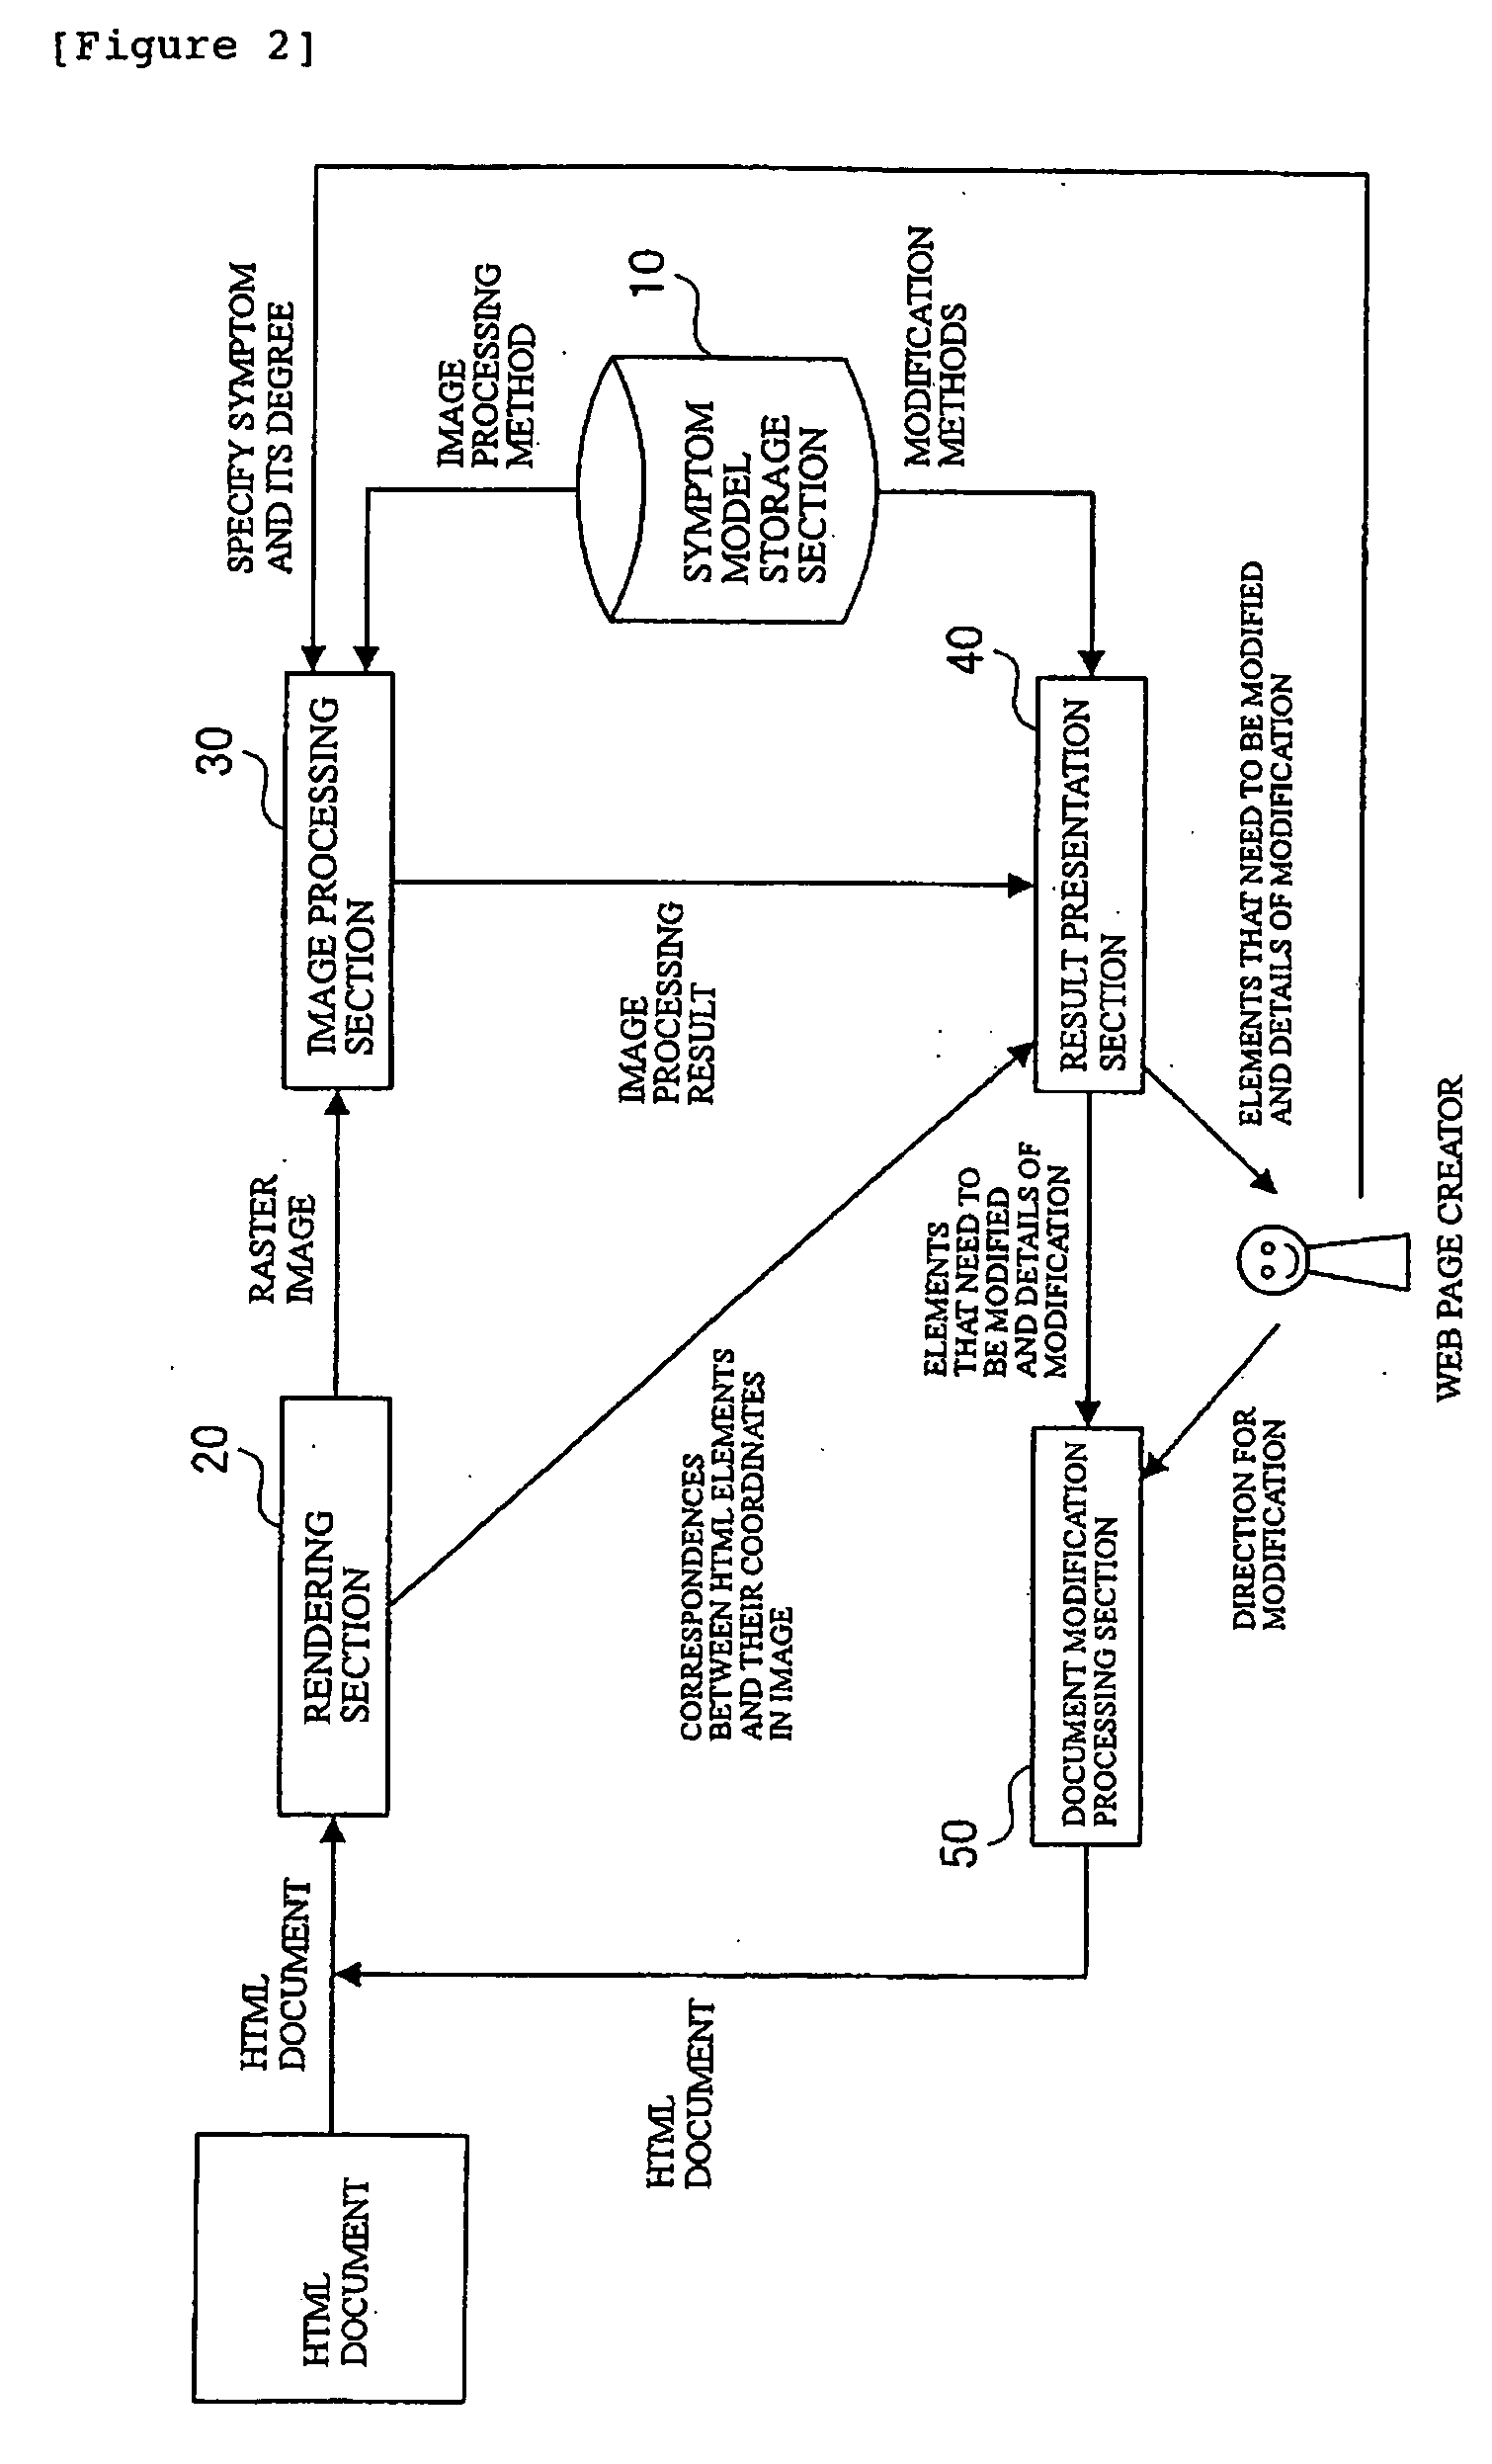 Data editing for improving readability of a display